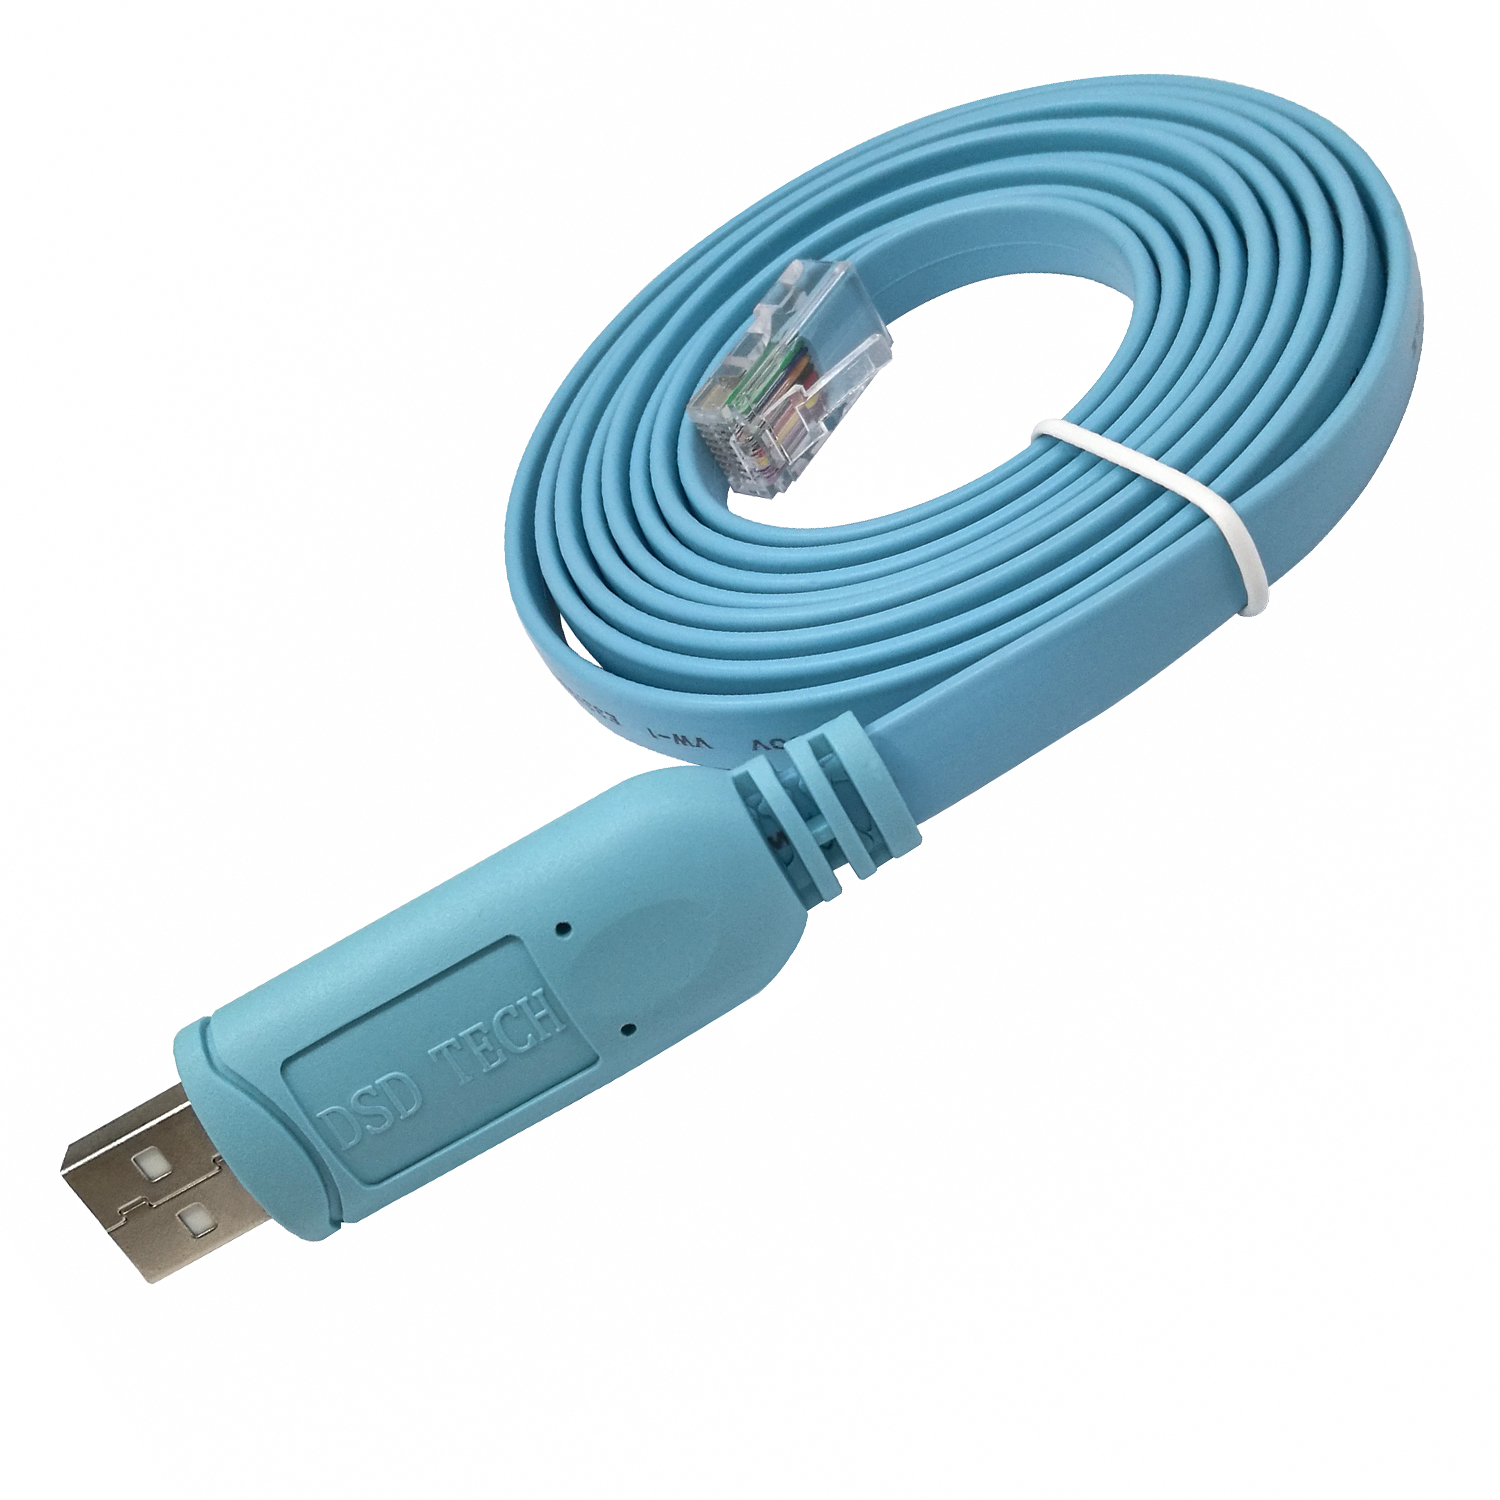 SH-RJ45A USB to RJ45 Console Cable